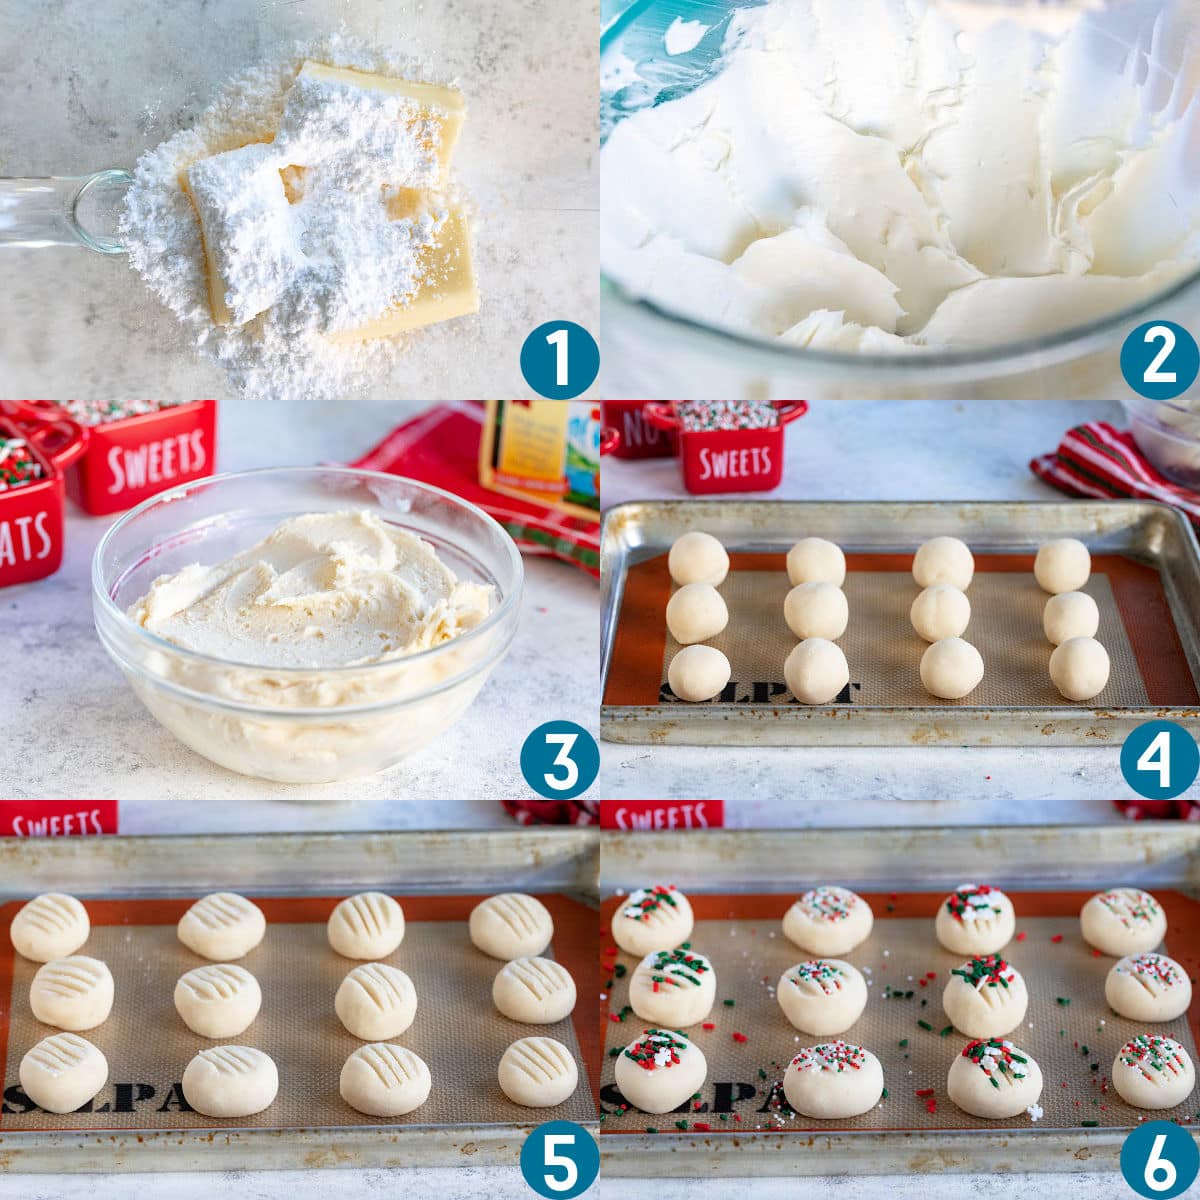 six image collage showing how to make whipped shortbread cookies from start to finish.